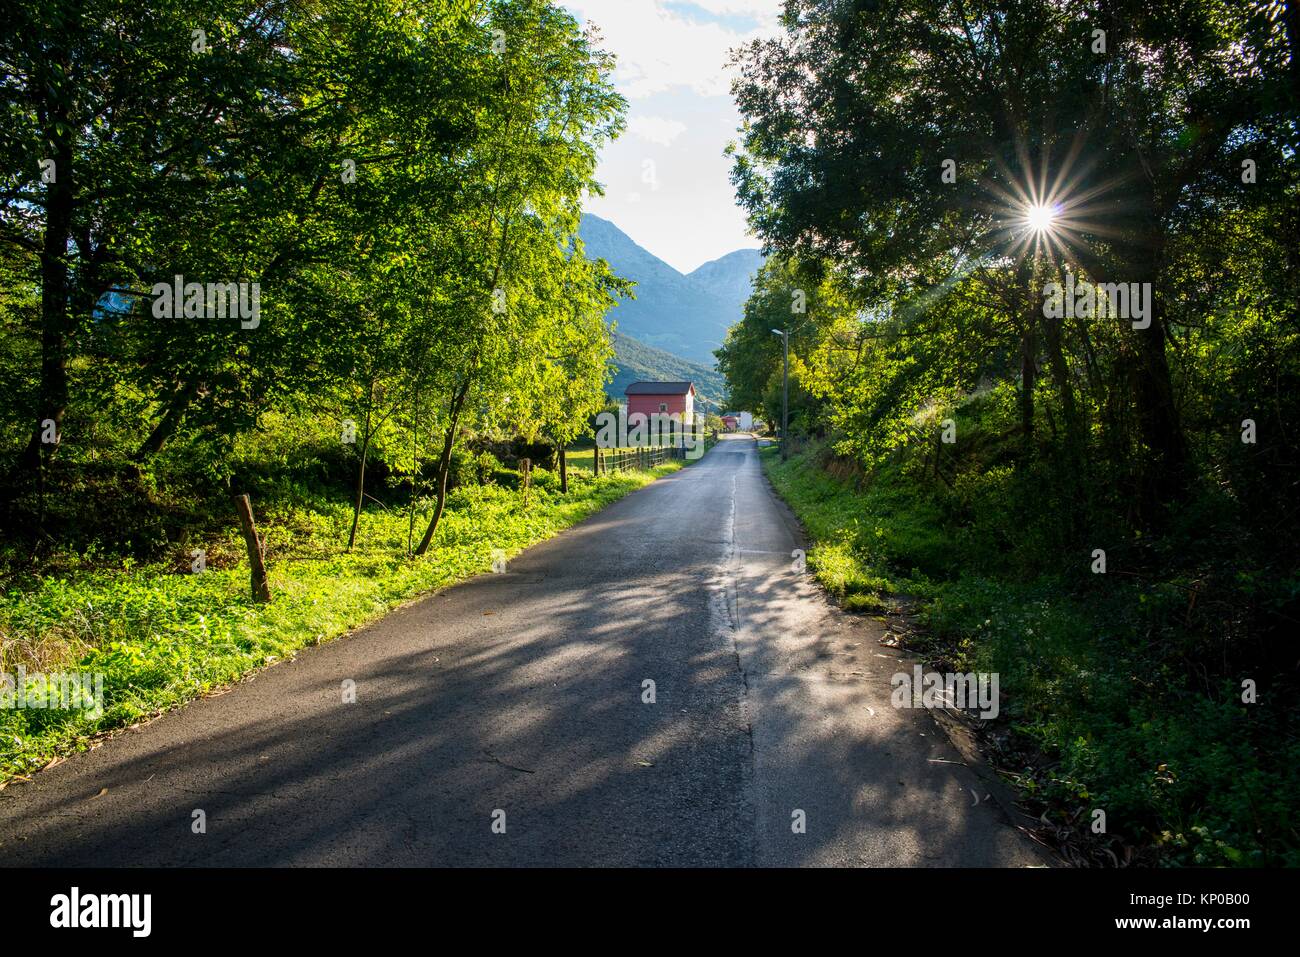 Rural environment in Cantabria. Spain. Europe. Stock Photo